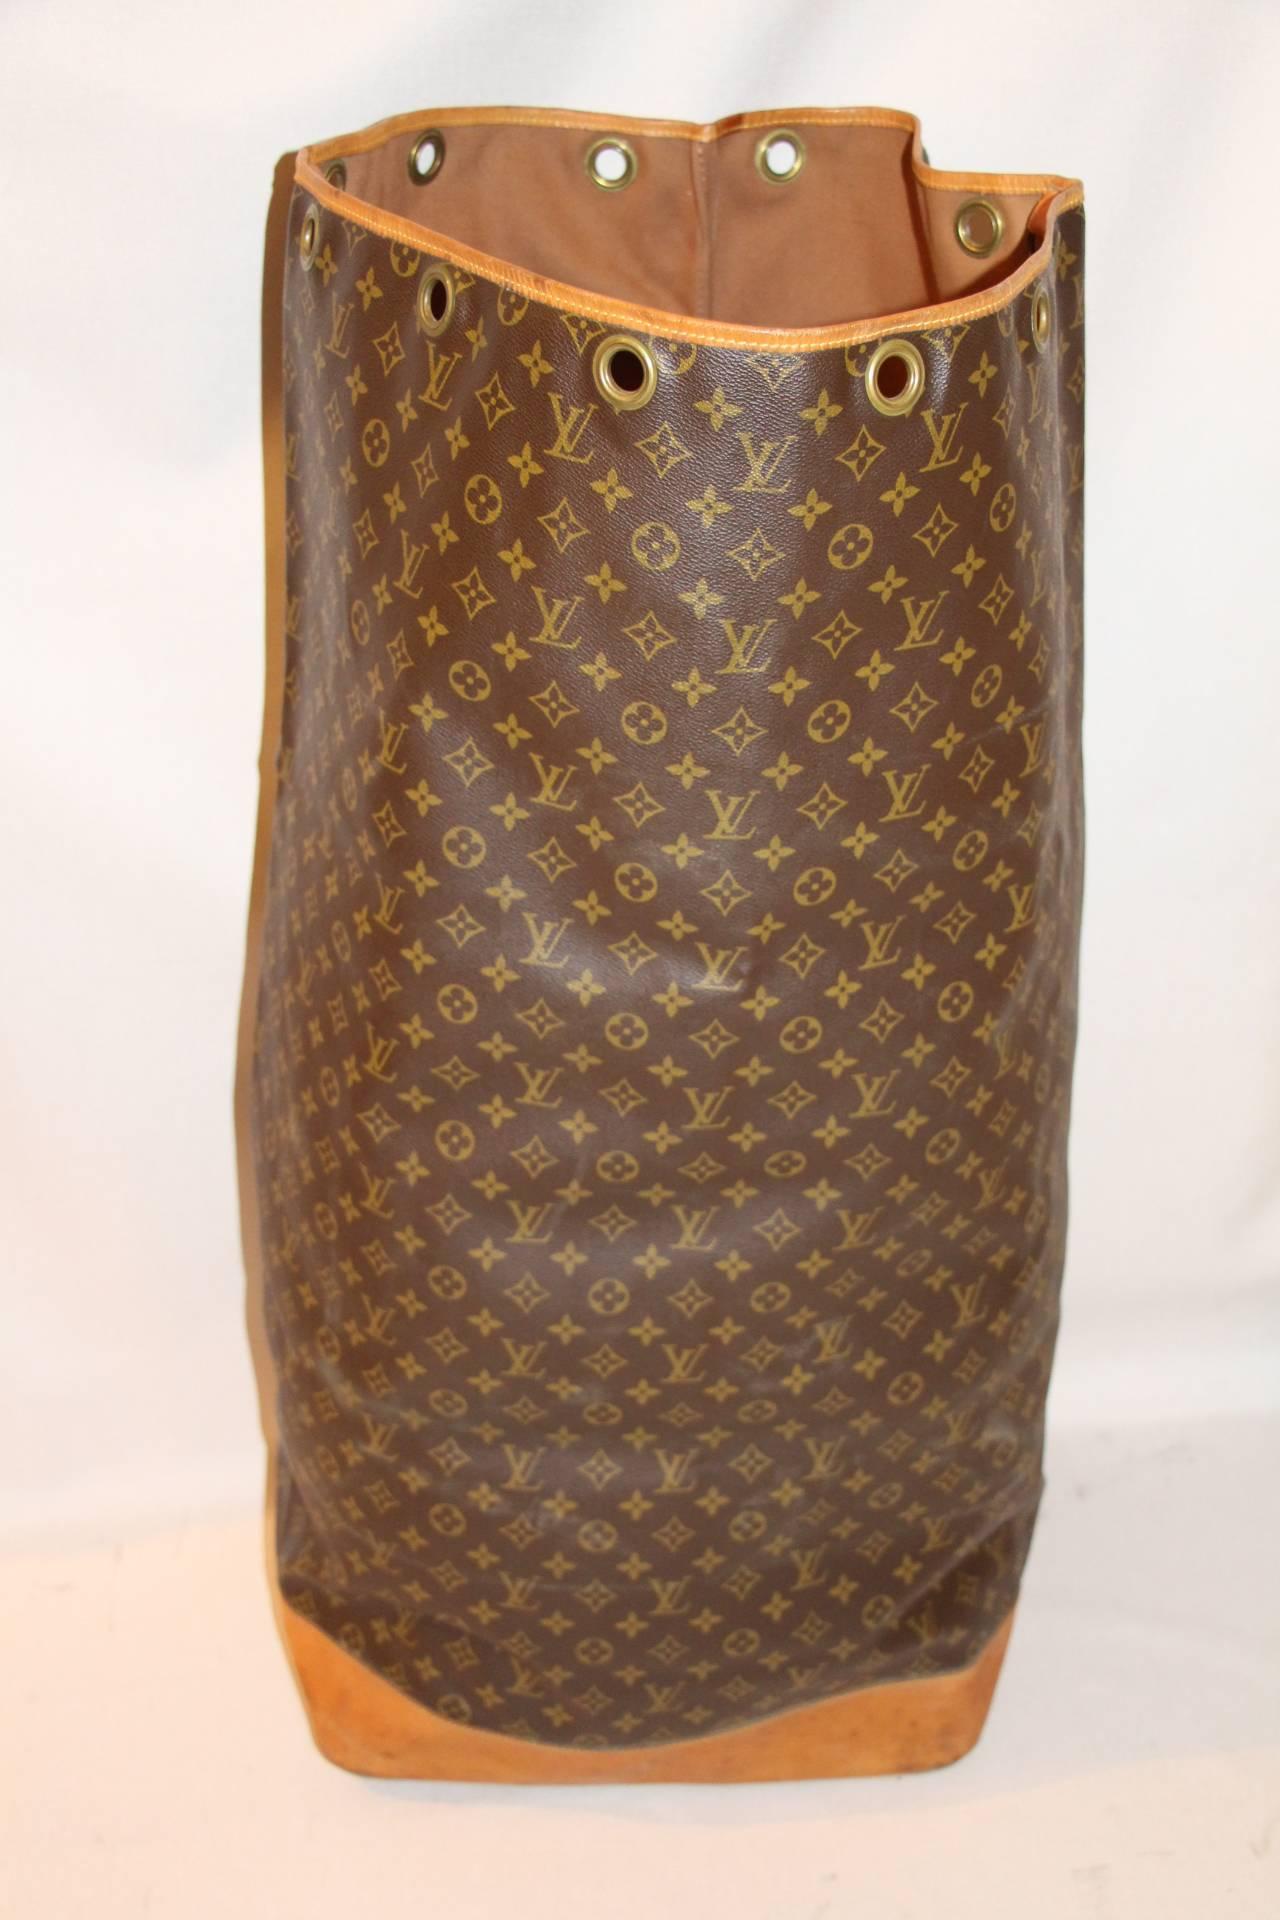 This impressive Louis Vuitton bag features monogram canvas in very good condition, its leather part has very few stains scratches. Its interior is in very good condition too. It comes with its original Louis Vuitton brass D-Ring and padlock to lock